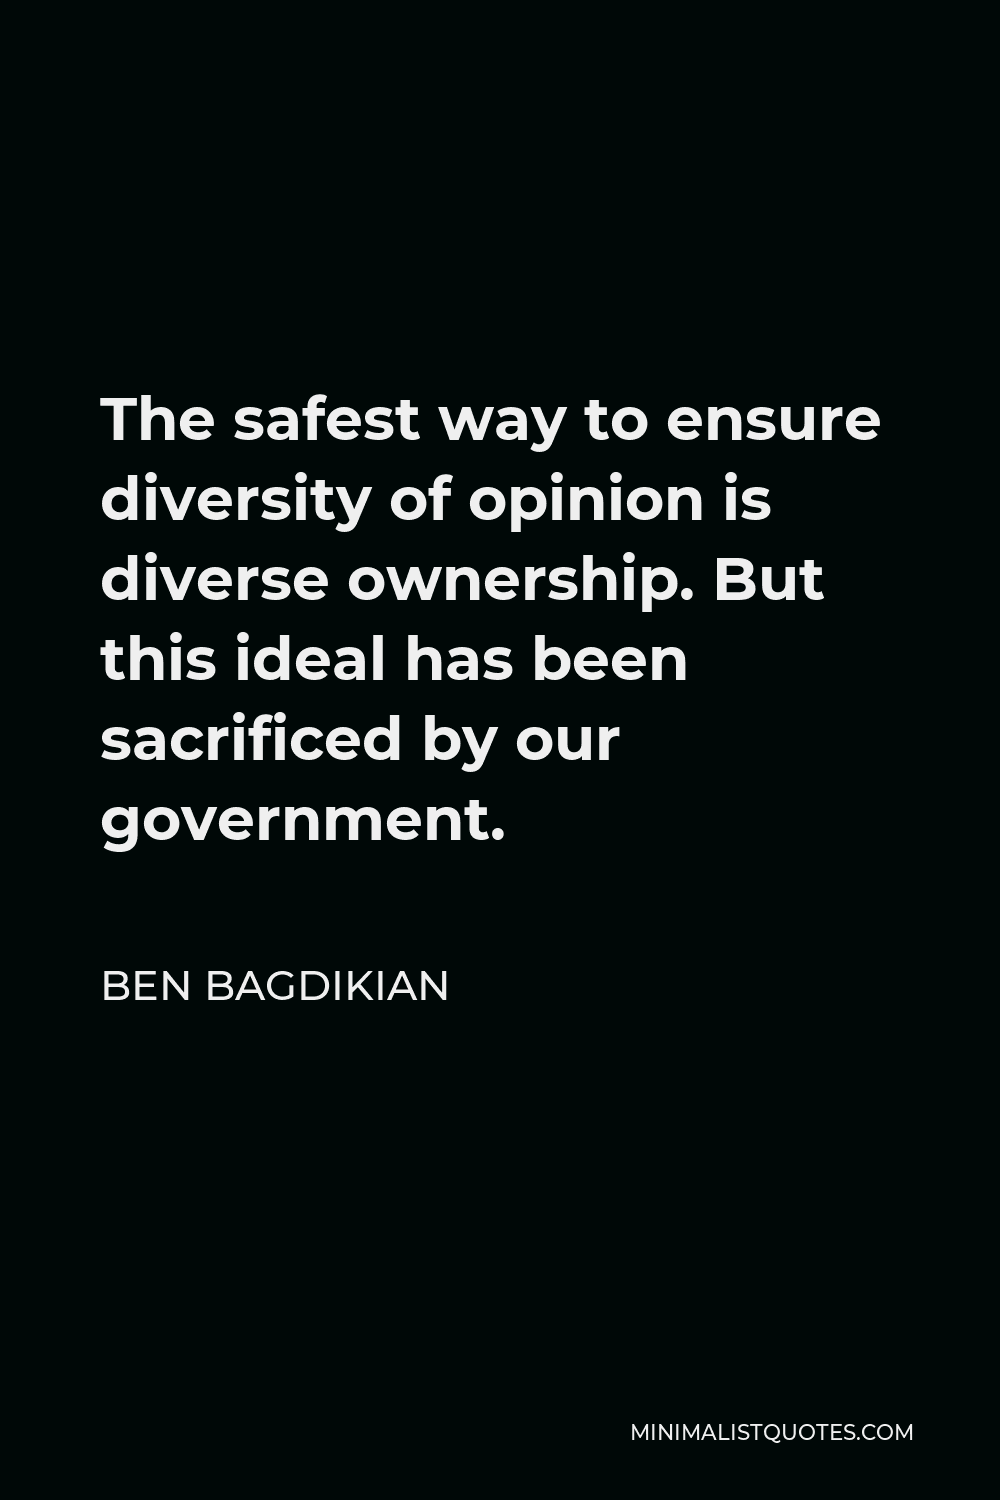 Ben Bagdikian Quote - The safest way to ensure diversity of opinion is diverse ownership. But this ideal has been sacrificed by our government.